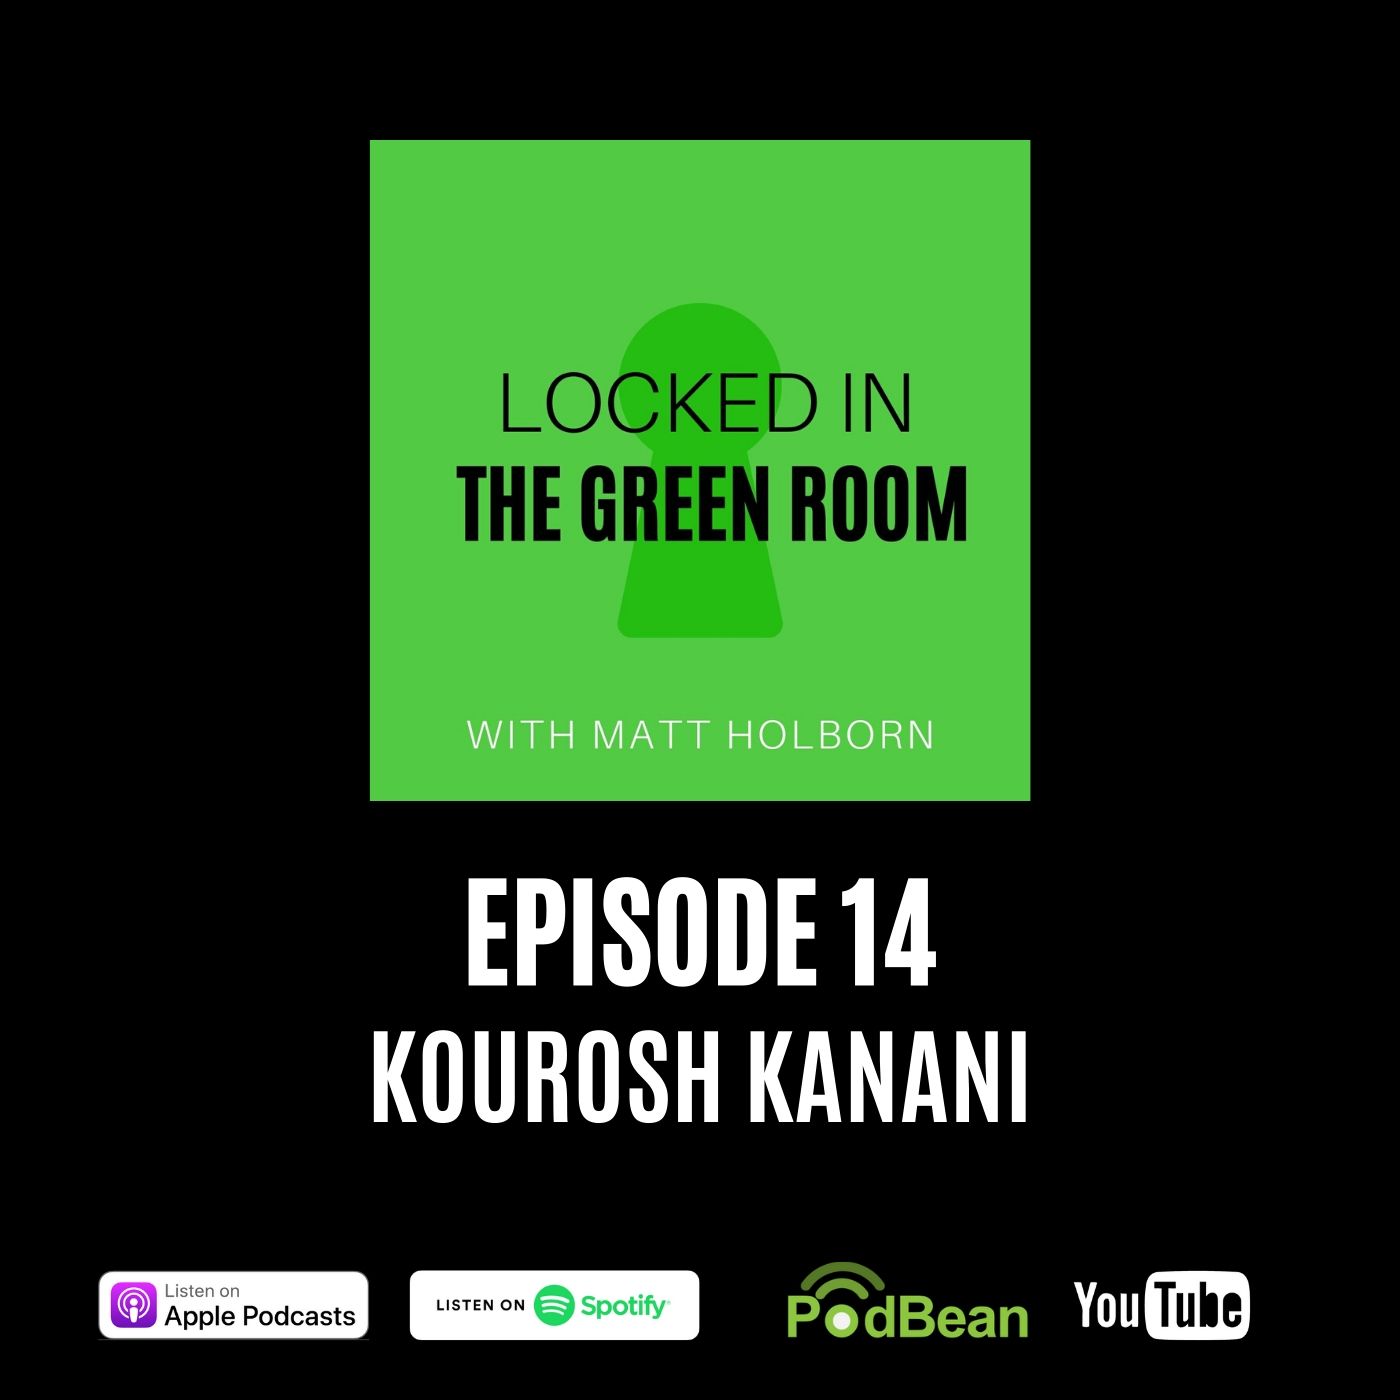 #14 Kourosh Kanani : Making your guitar practise count, learning to cook and staying balanced on your own.